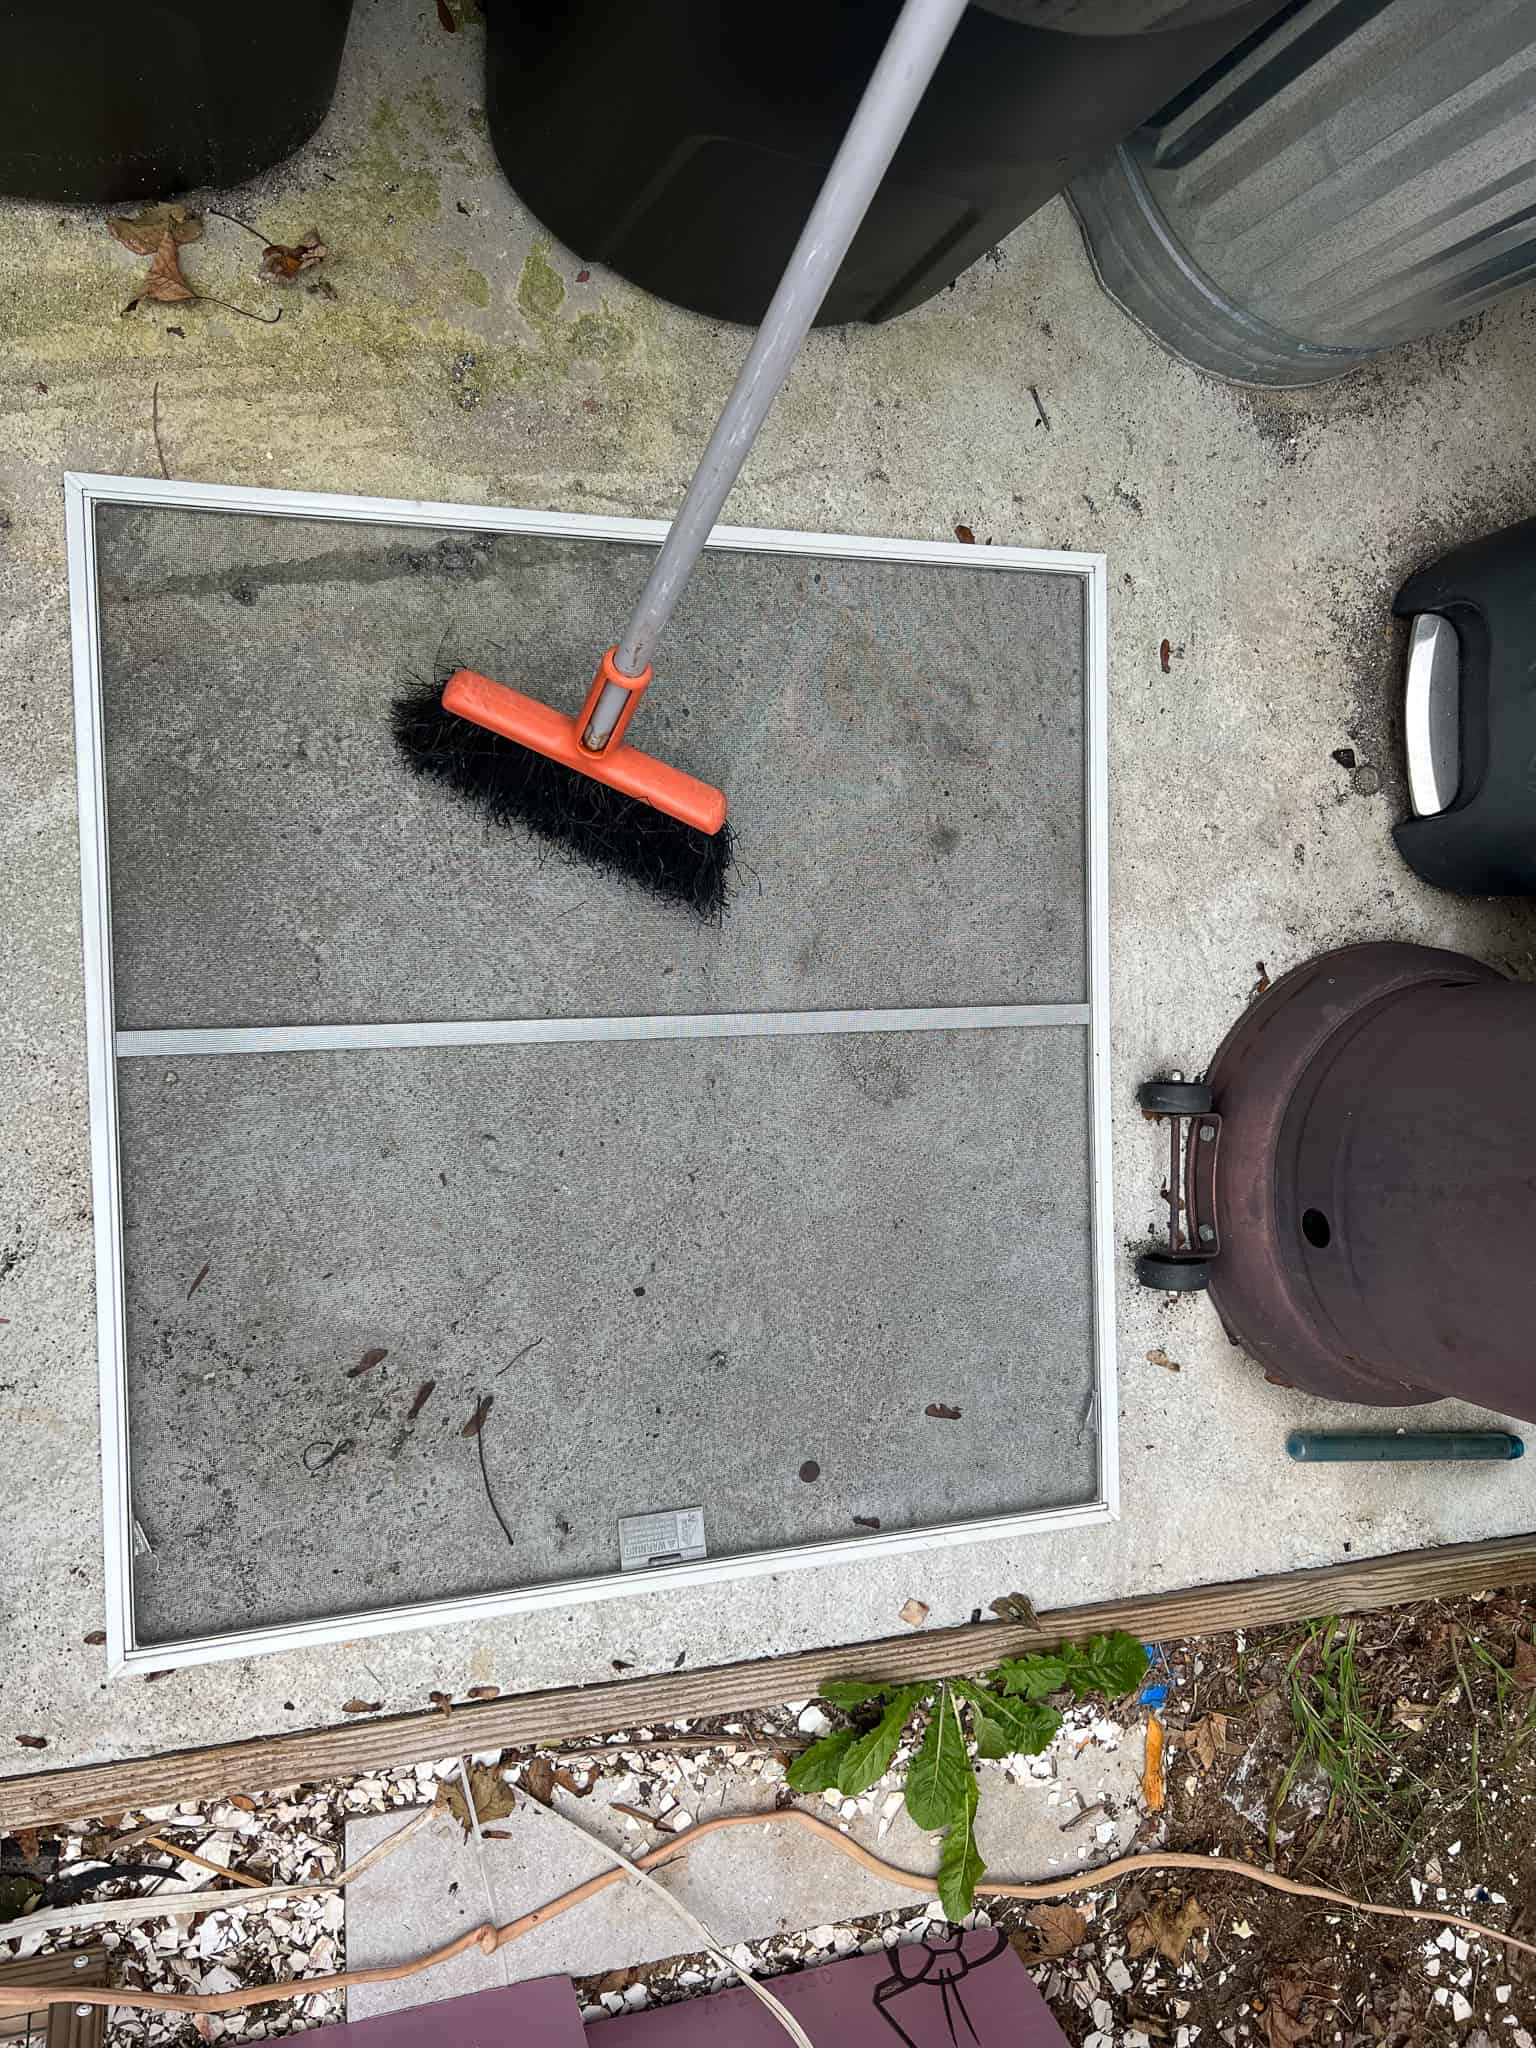 cleaning window screen with broom